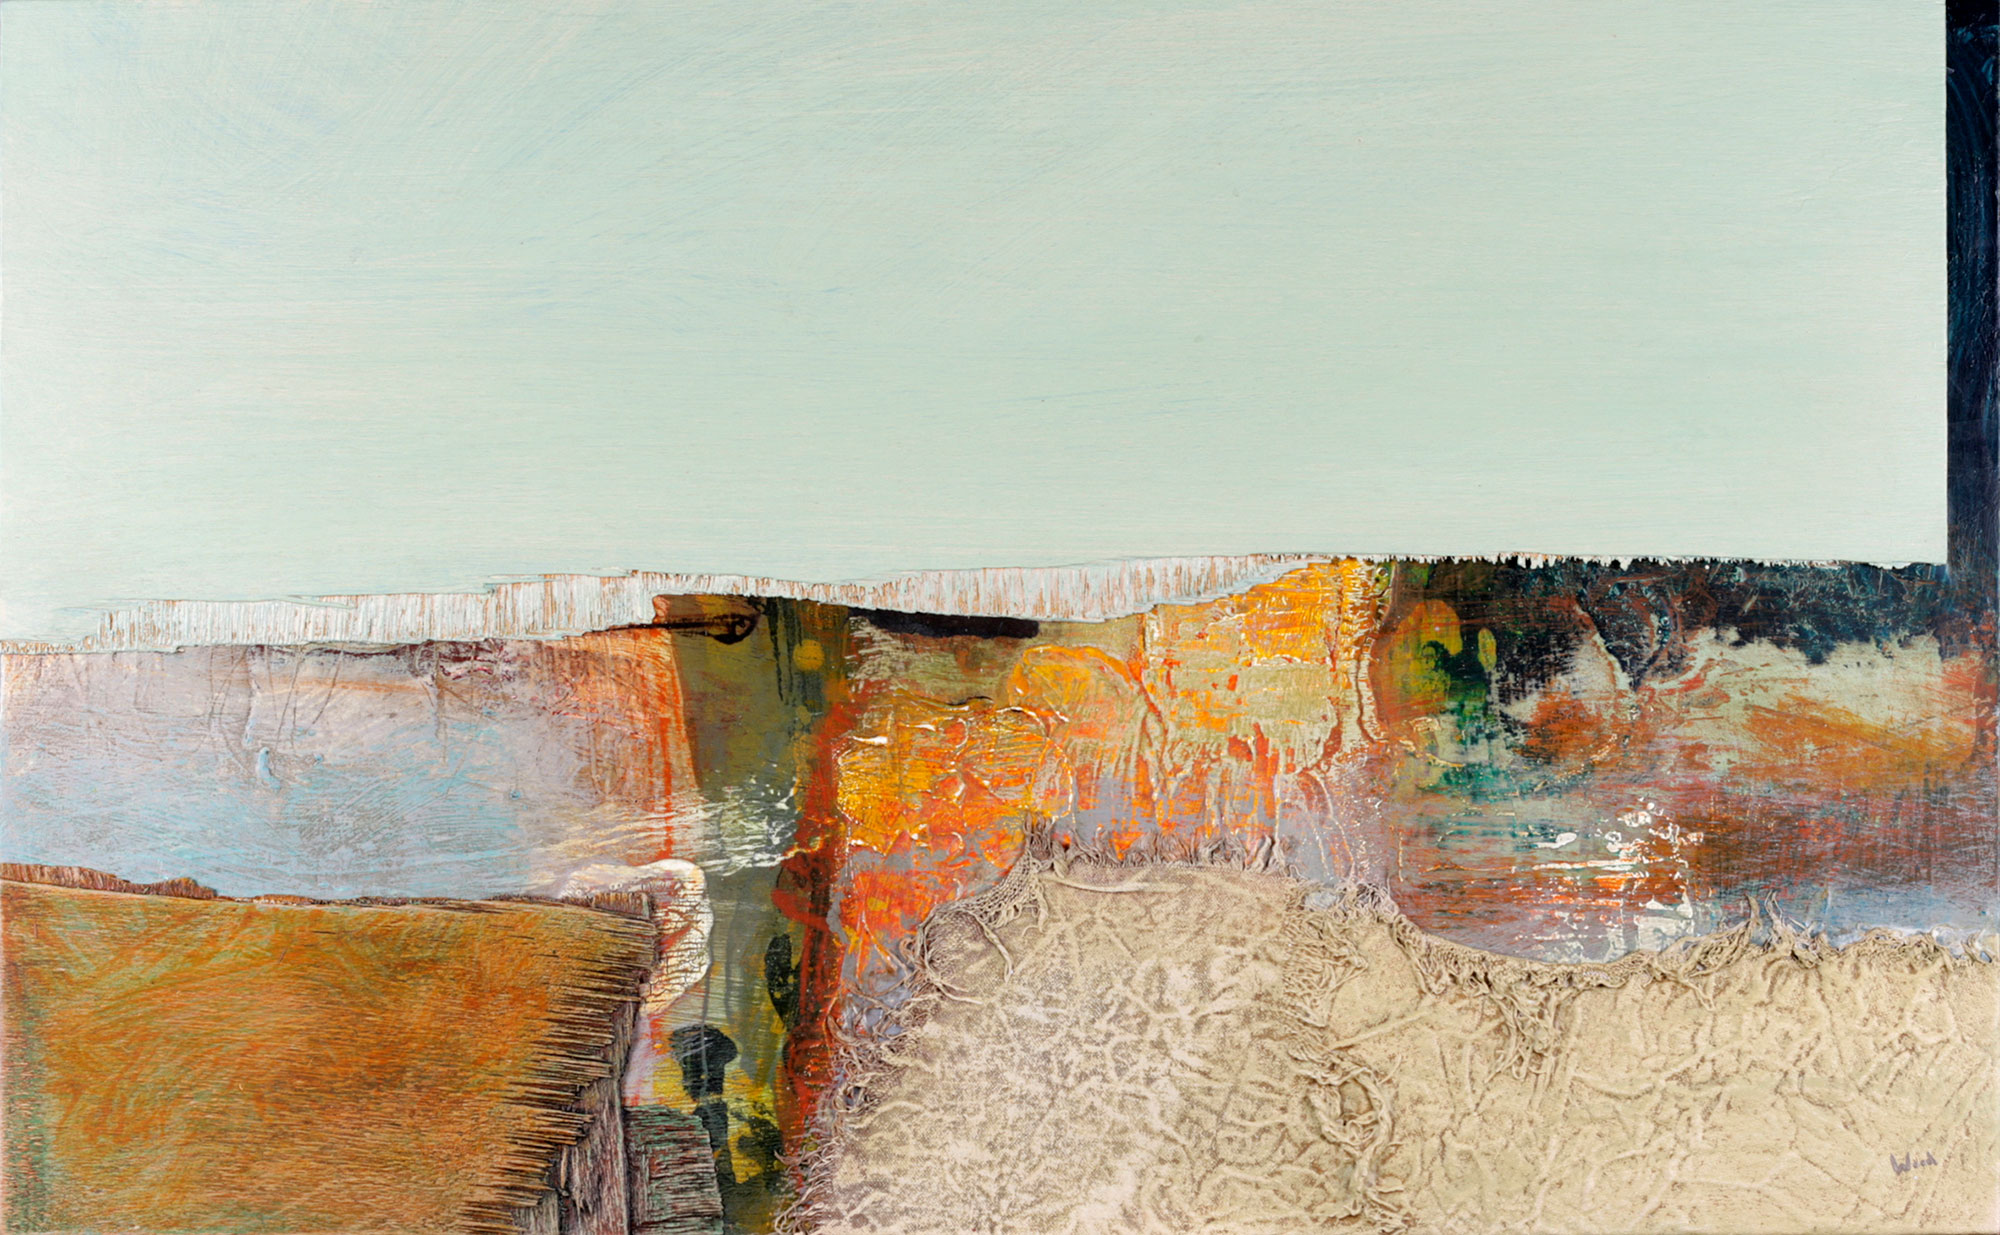 'The Weather Turned Around'; 19 x 30.75 inches (48 x 78 cm); Acrylic & mixed media assemblage on Board; Cat. 1106 [SOLD]